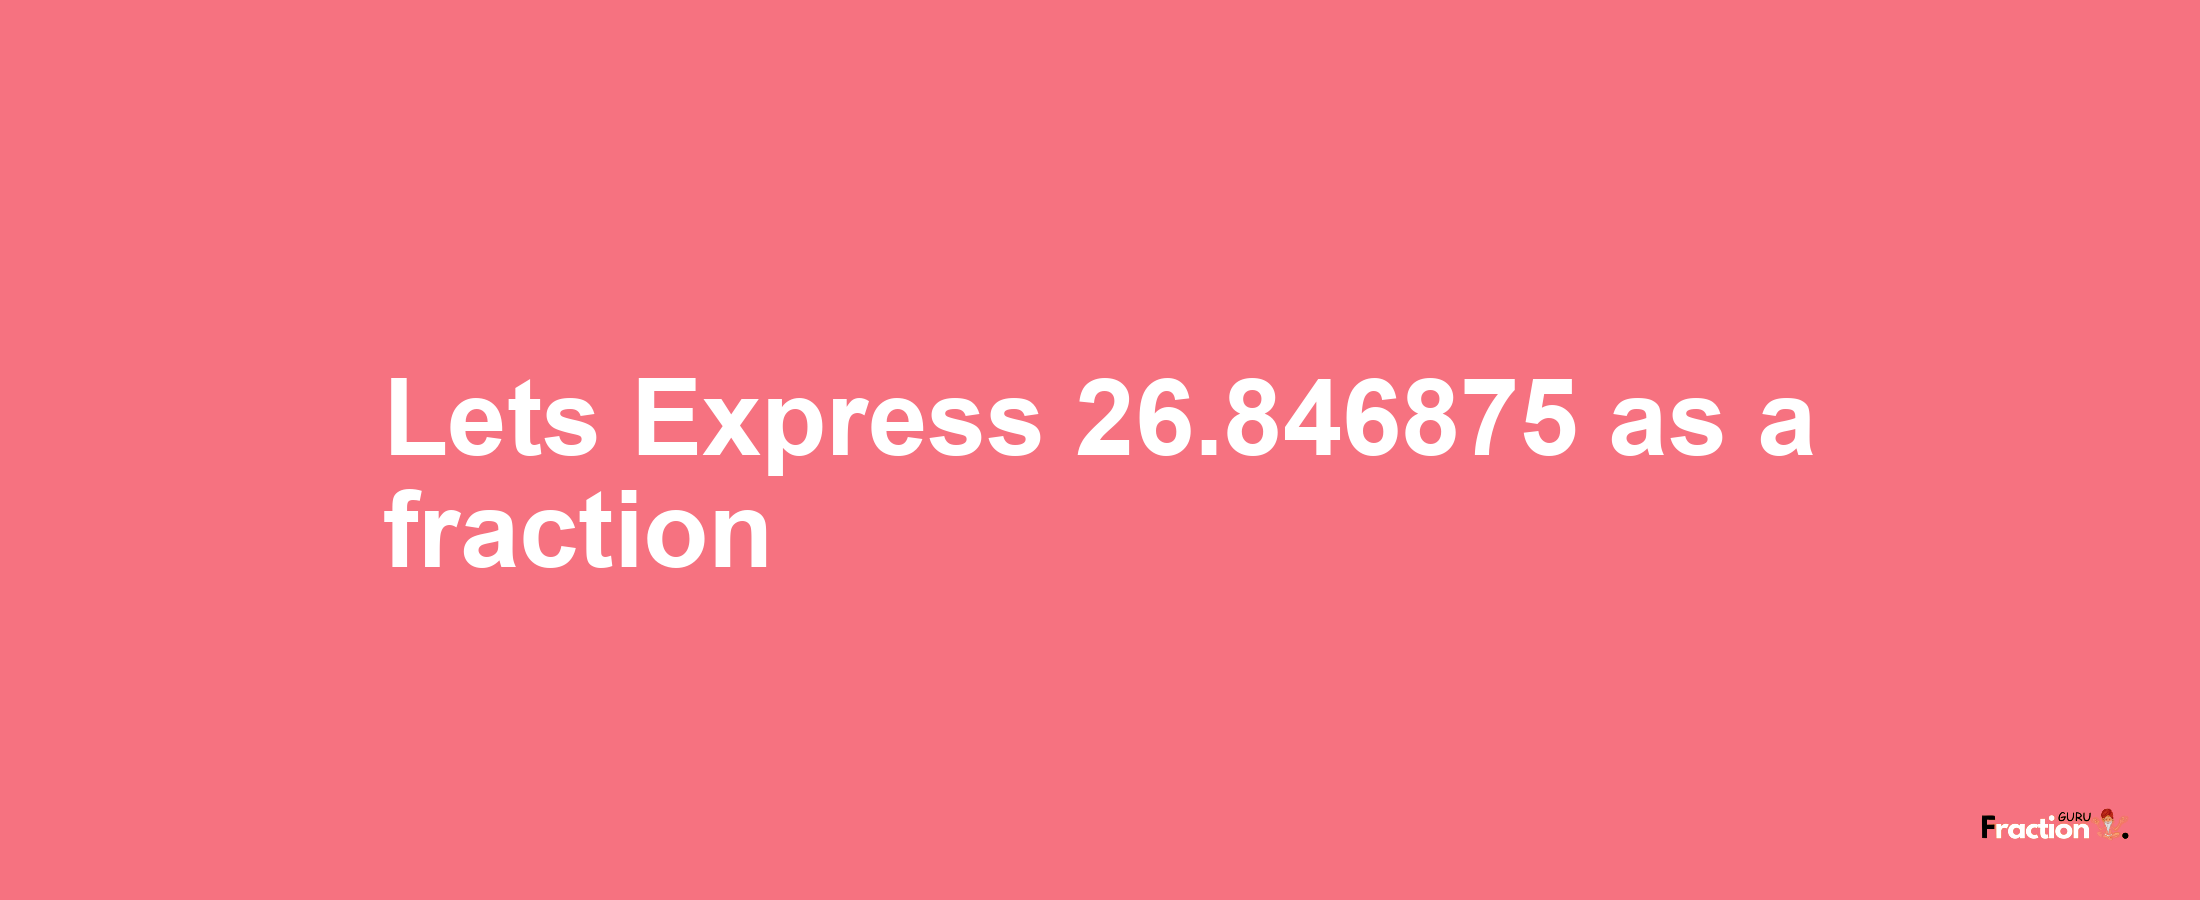 Lets Express 26.846875 as afraction